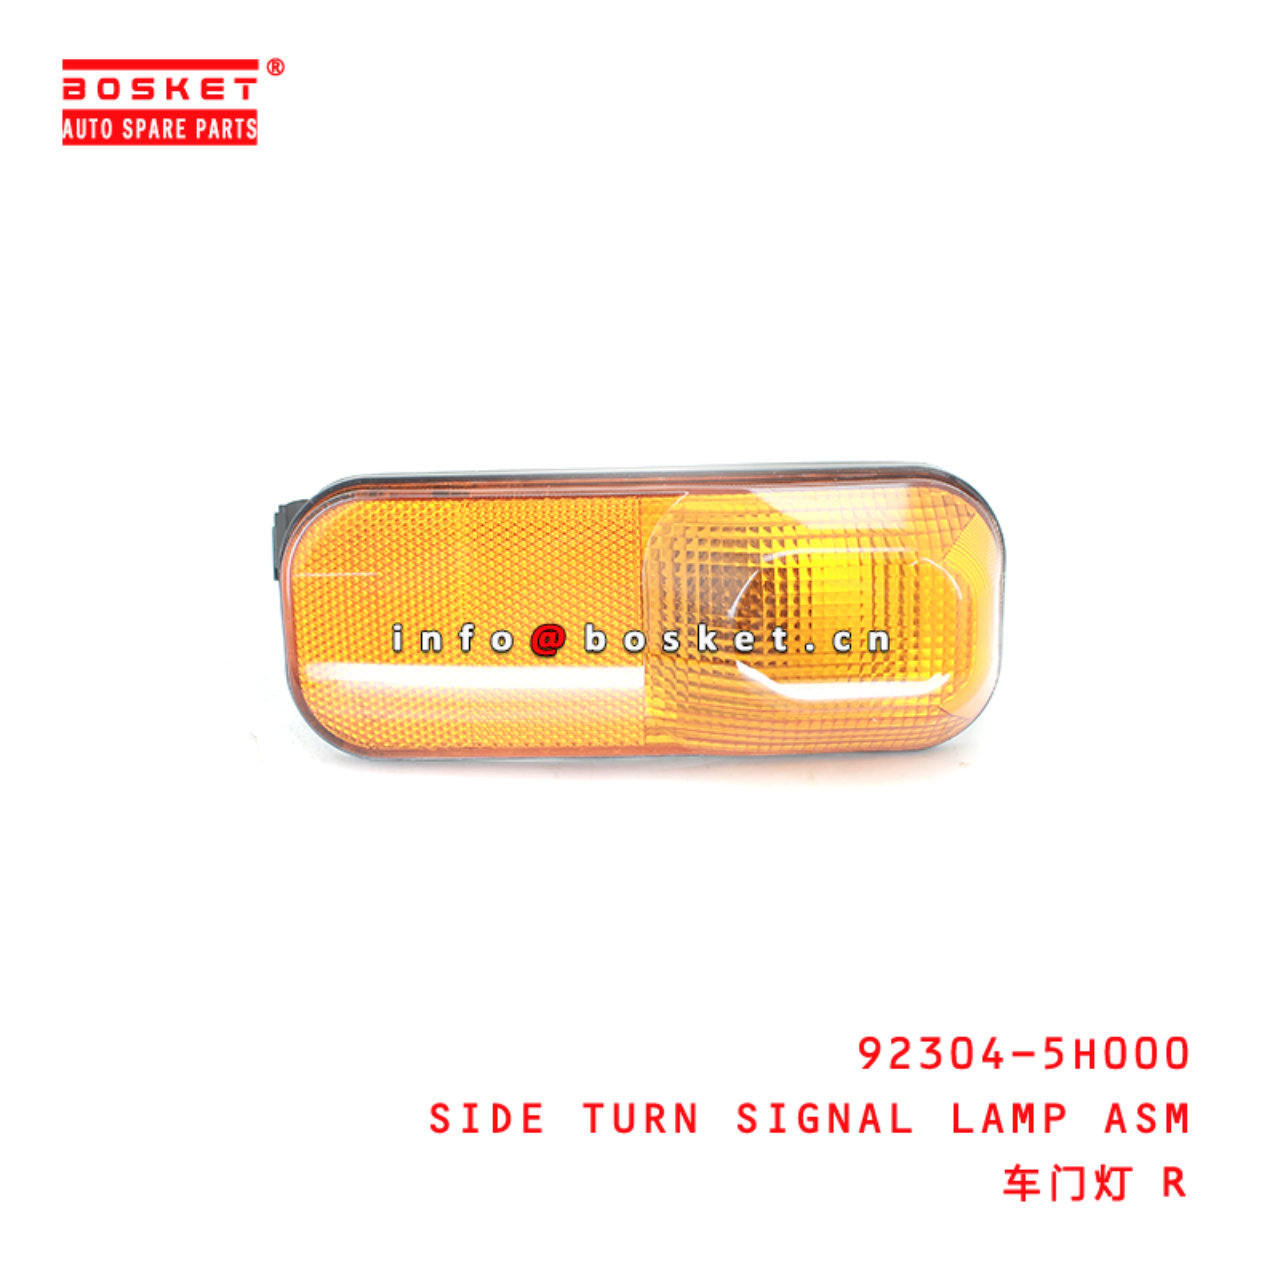 92304-5H000 Side Turn Signal Lamp Asm Suitable for ISUZU 现代HD72